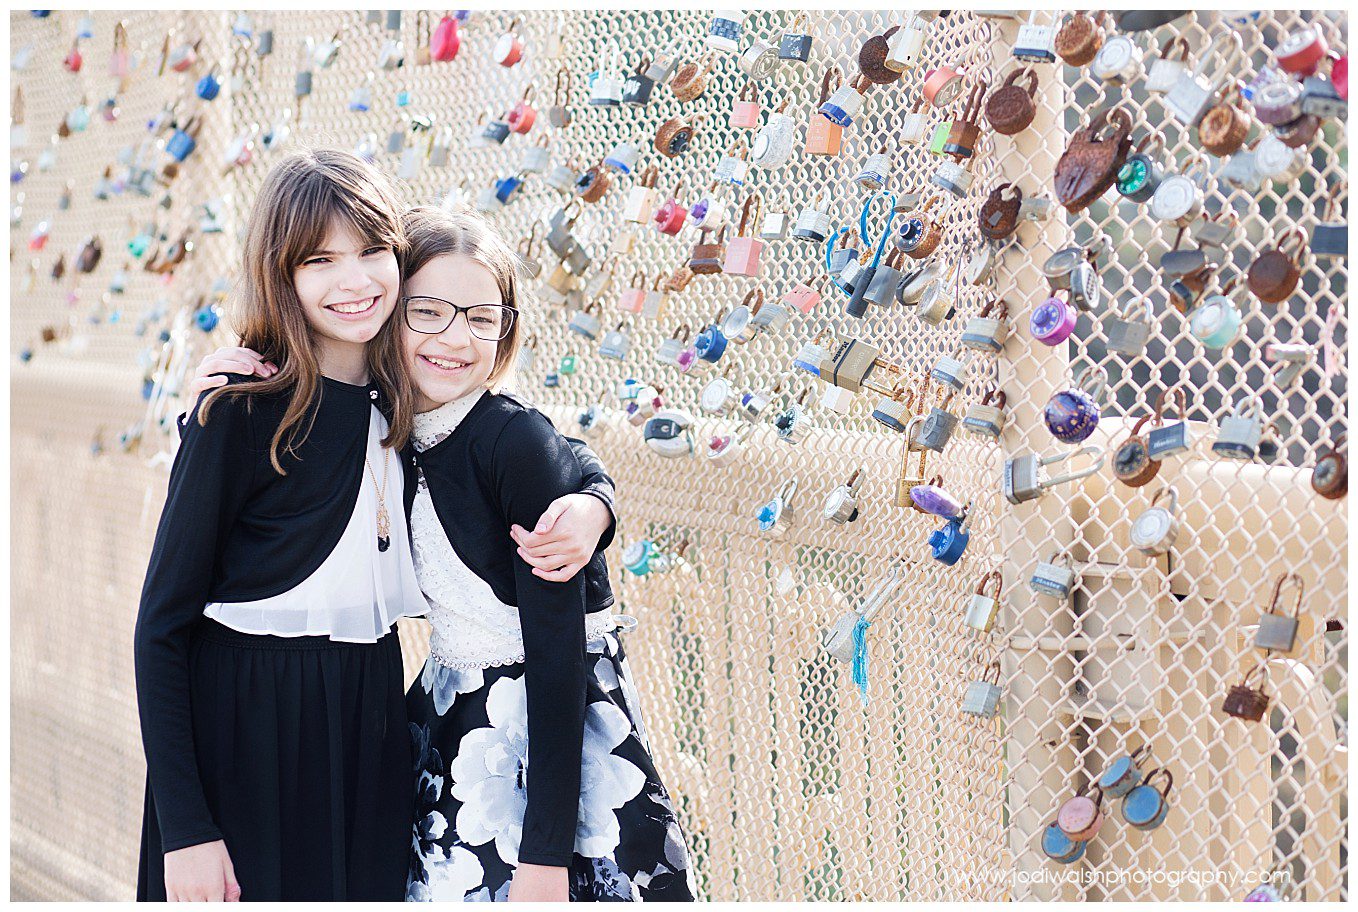 image of pre-teen sisters hugging on a bridge in Oakland. The younger sister wears glasses. They're both smiling. The bridge fencing is covered with a variety of combination locks and padlocks.